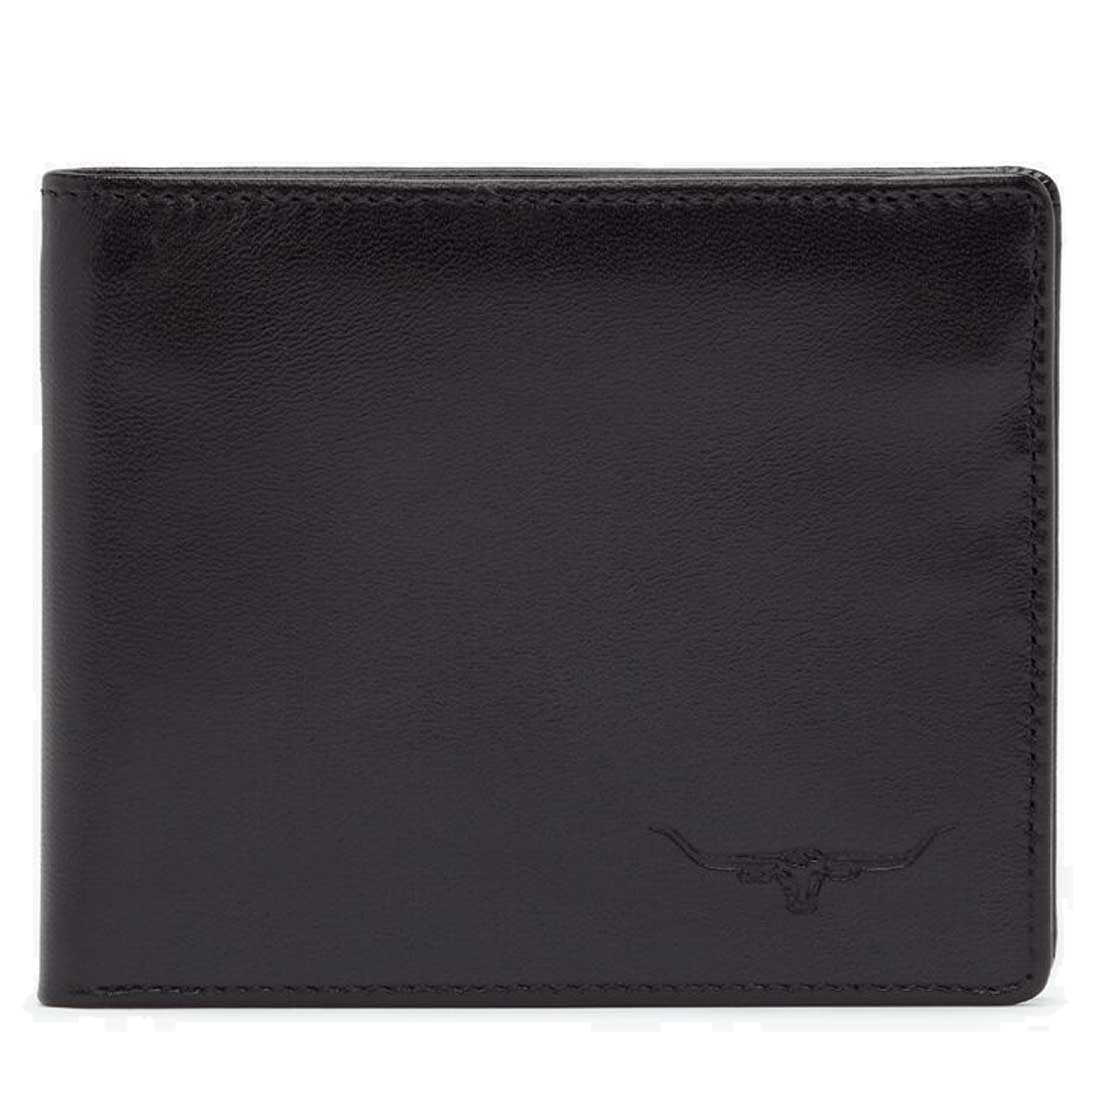 RM WILLIAMS Tri Fold Wallet - Mens Yearling Leather - Black